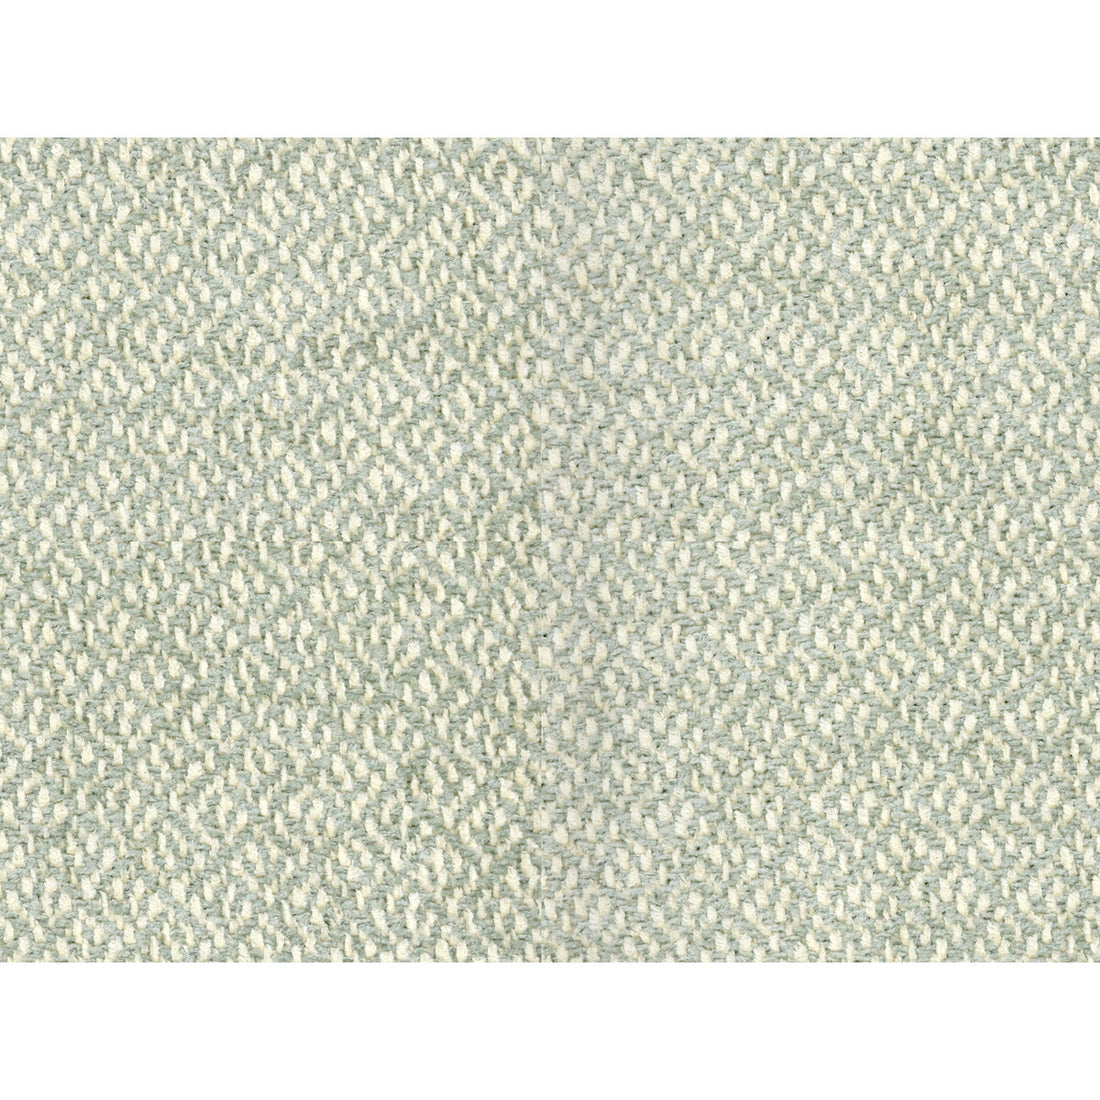 Cottian Chenille fabric in seaglass color - pattern 8016110.113.0 - by Brunschwig &amp; Fils in the Chambery Textures collection